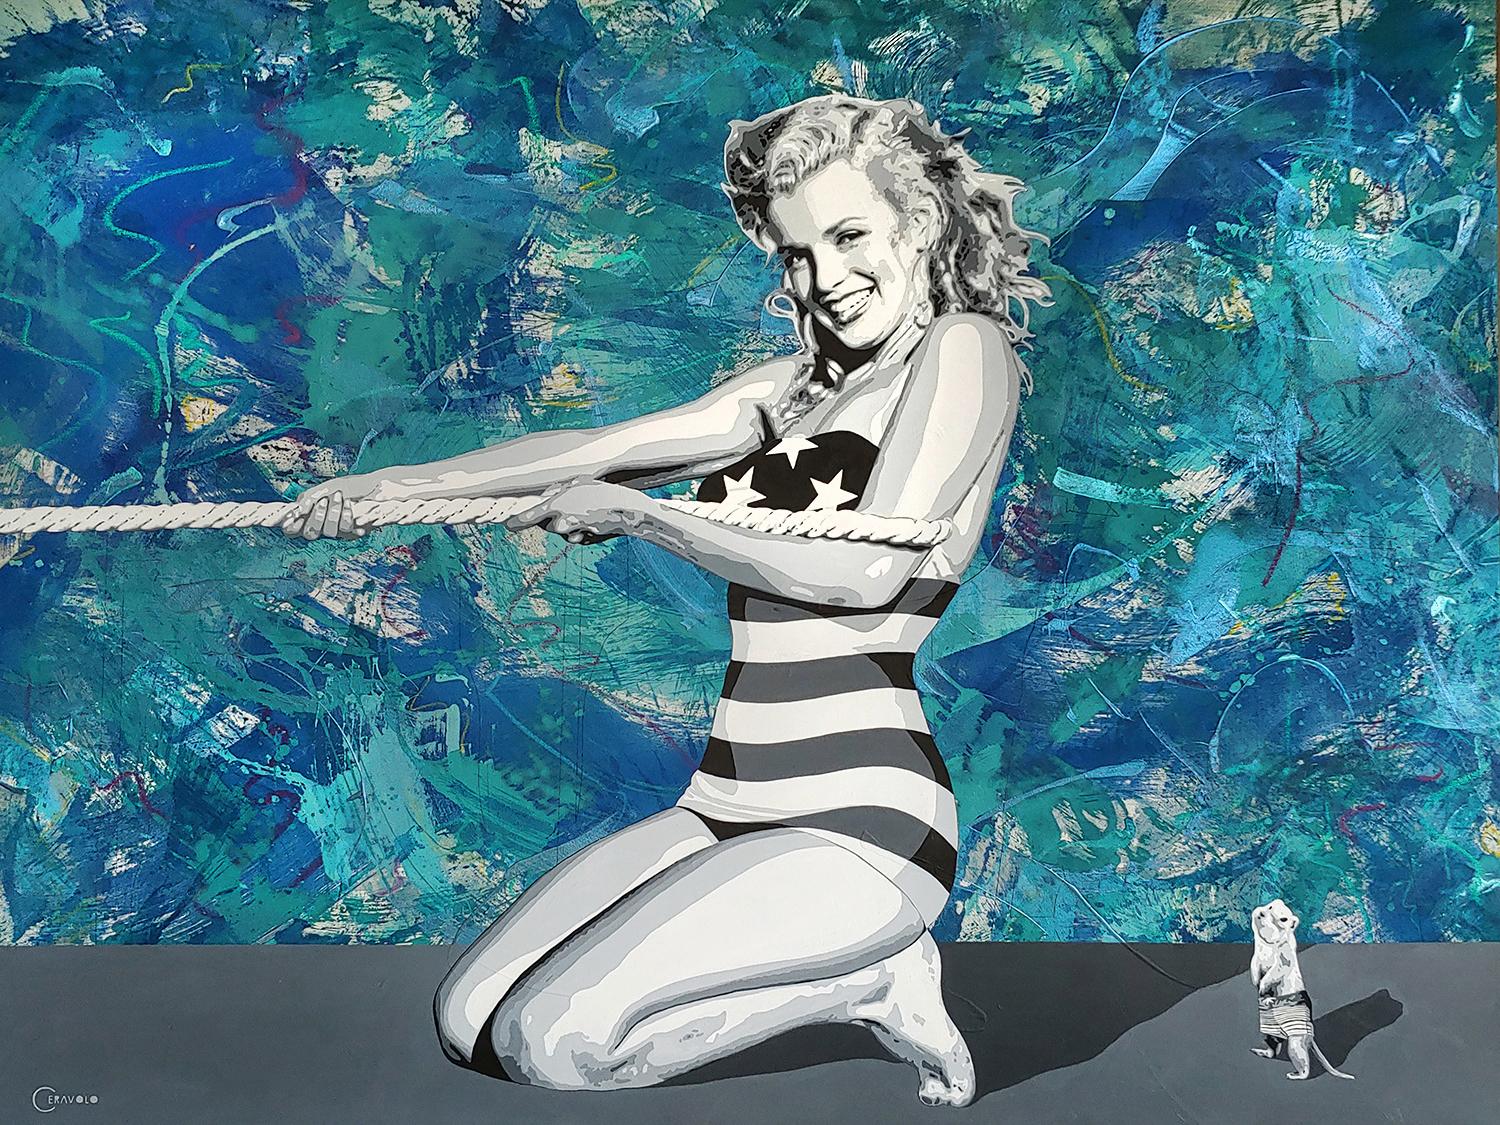 Ceravolo Figurative Painting - Young Marilyn at the Beach tug of war, Large 68x88 Oil and Acrylic on canvas